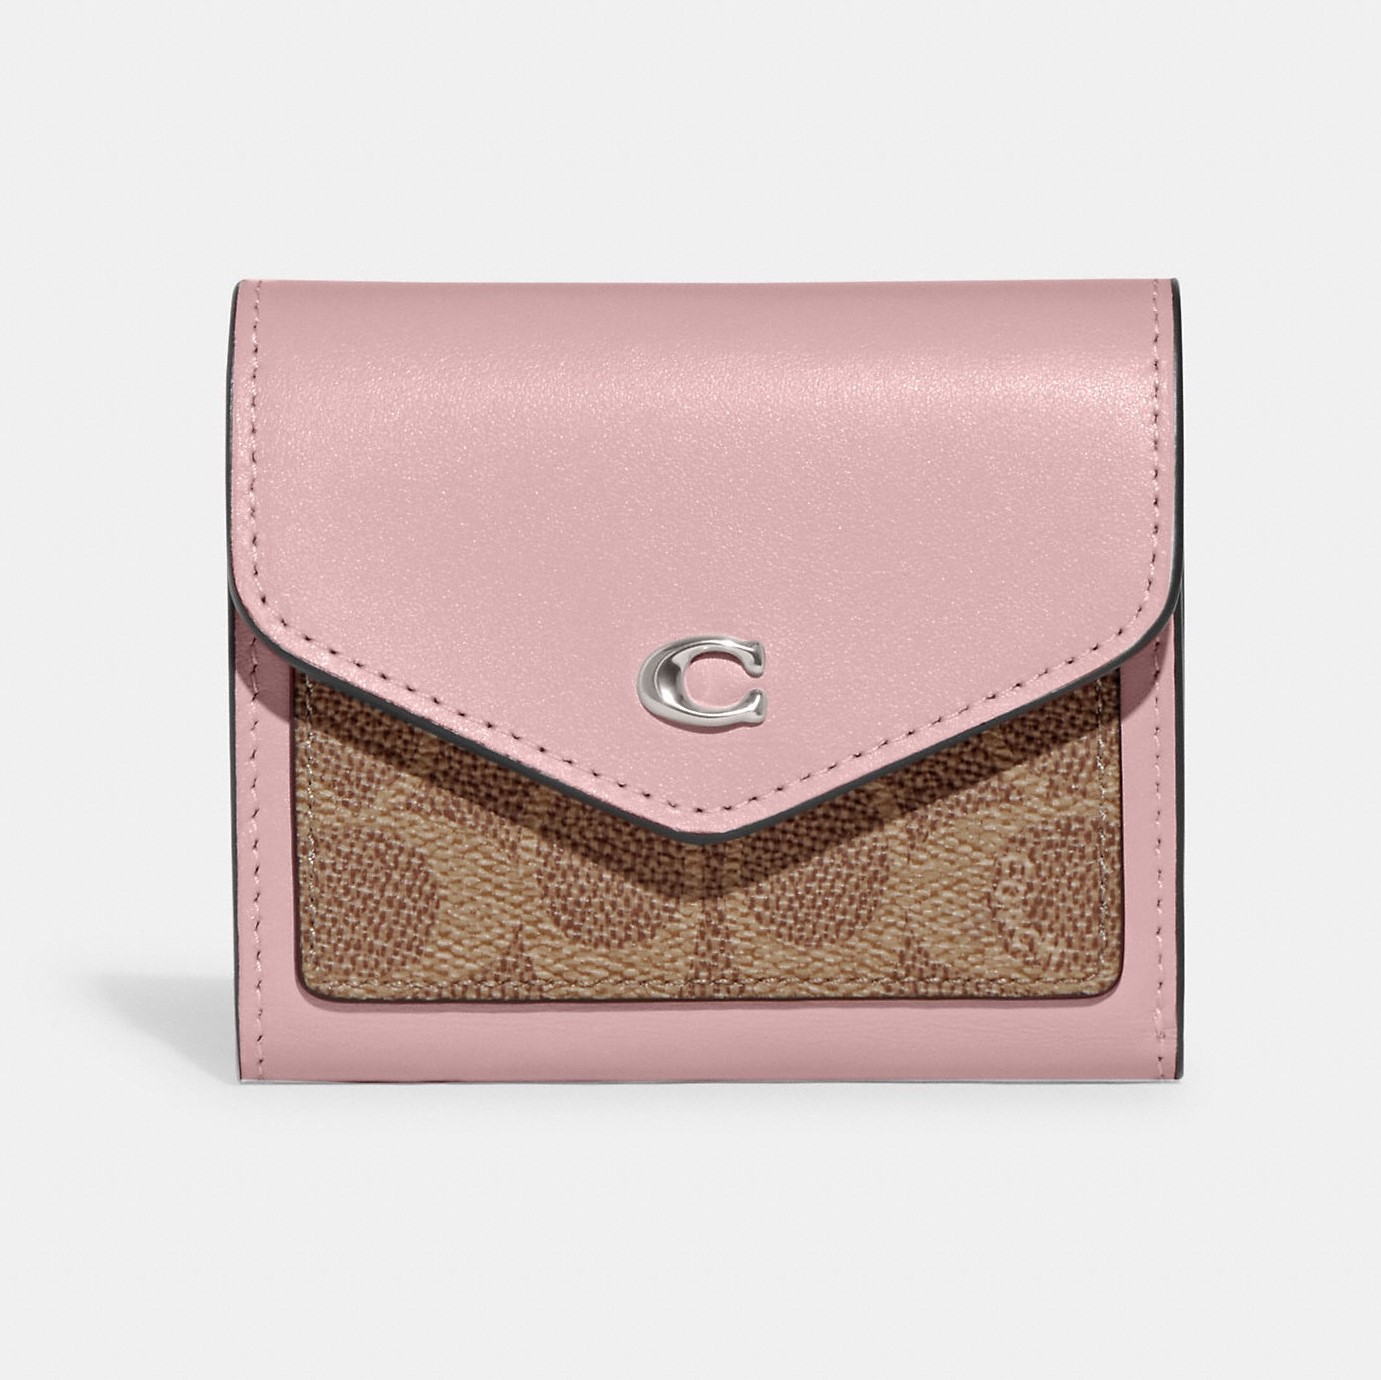 VÍ NỮ NGẮN COACH WYN SMALL WALLET IN COLORBLOCK SIGNATURE CANVAS CF937 2